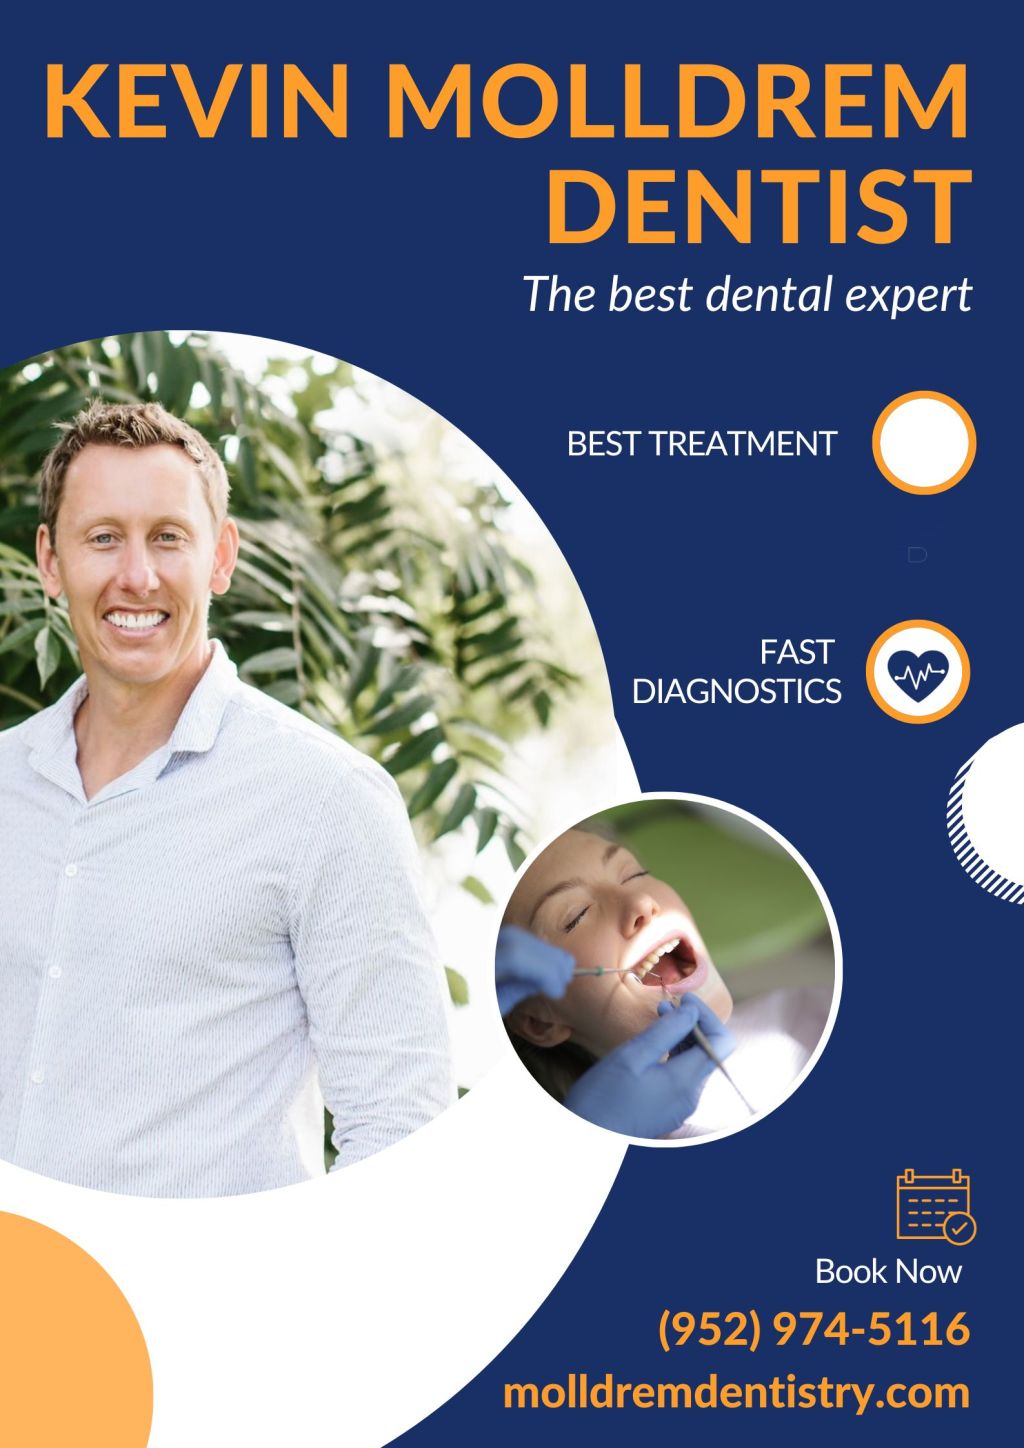 Latest Article By Kevin Molldrem Dentist And Molldrem Family Dentistry | Understanding the Dental Implant Procedure Step by Step